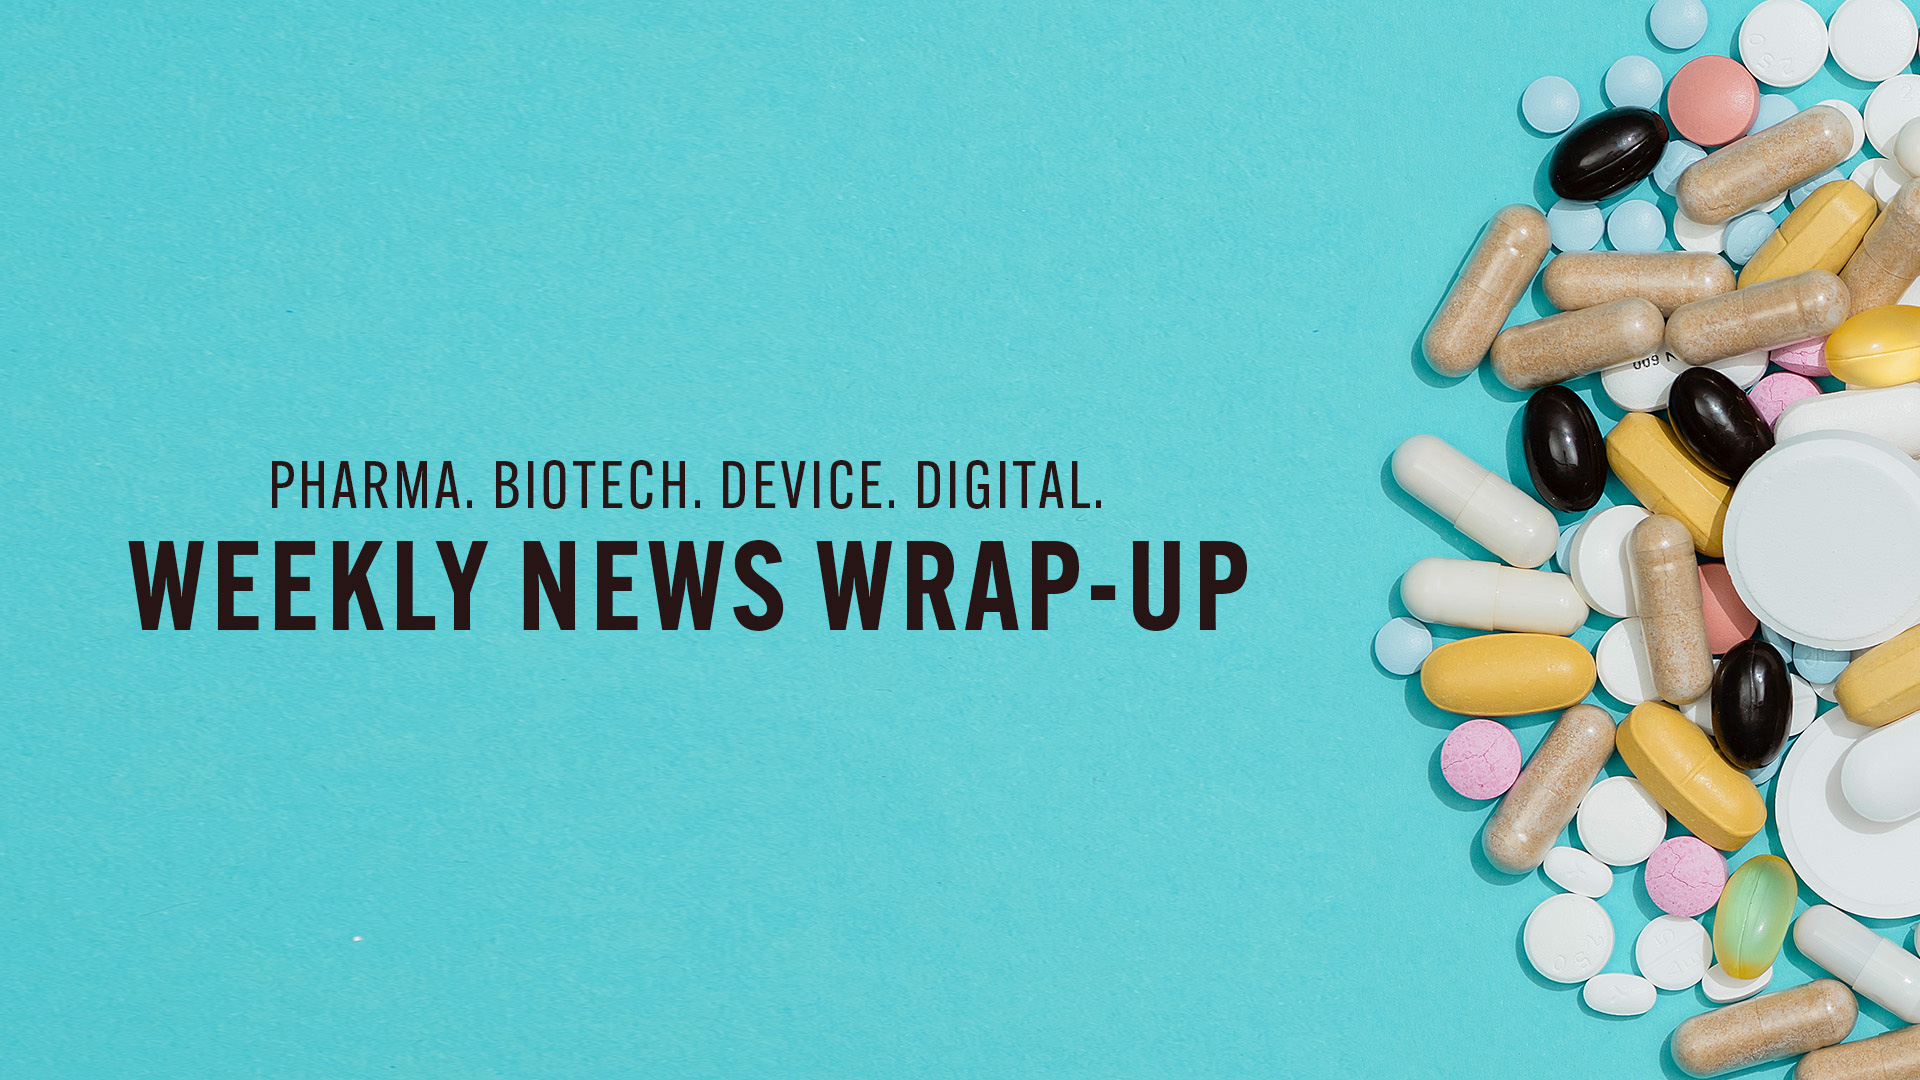 Healthcare Industry News Weekly Wrap-Up: October 7, 2022